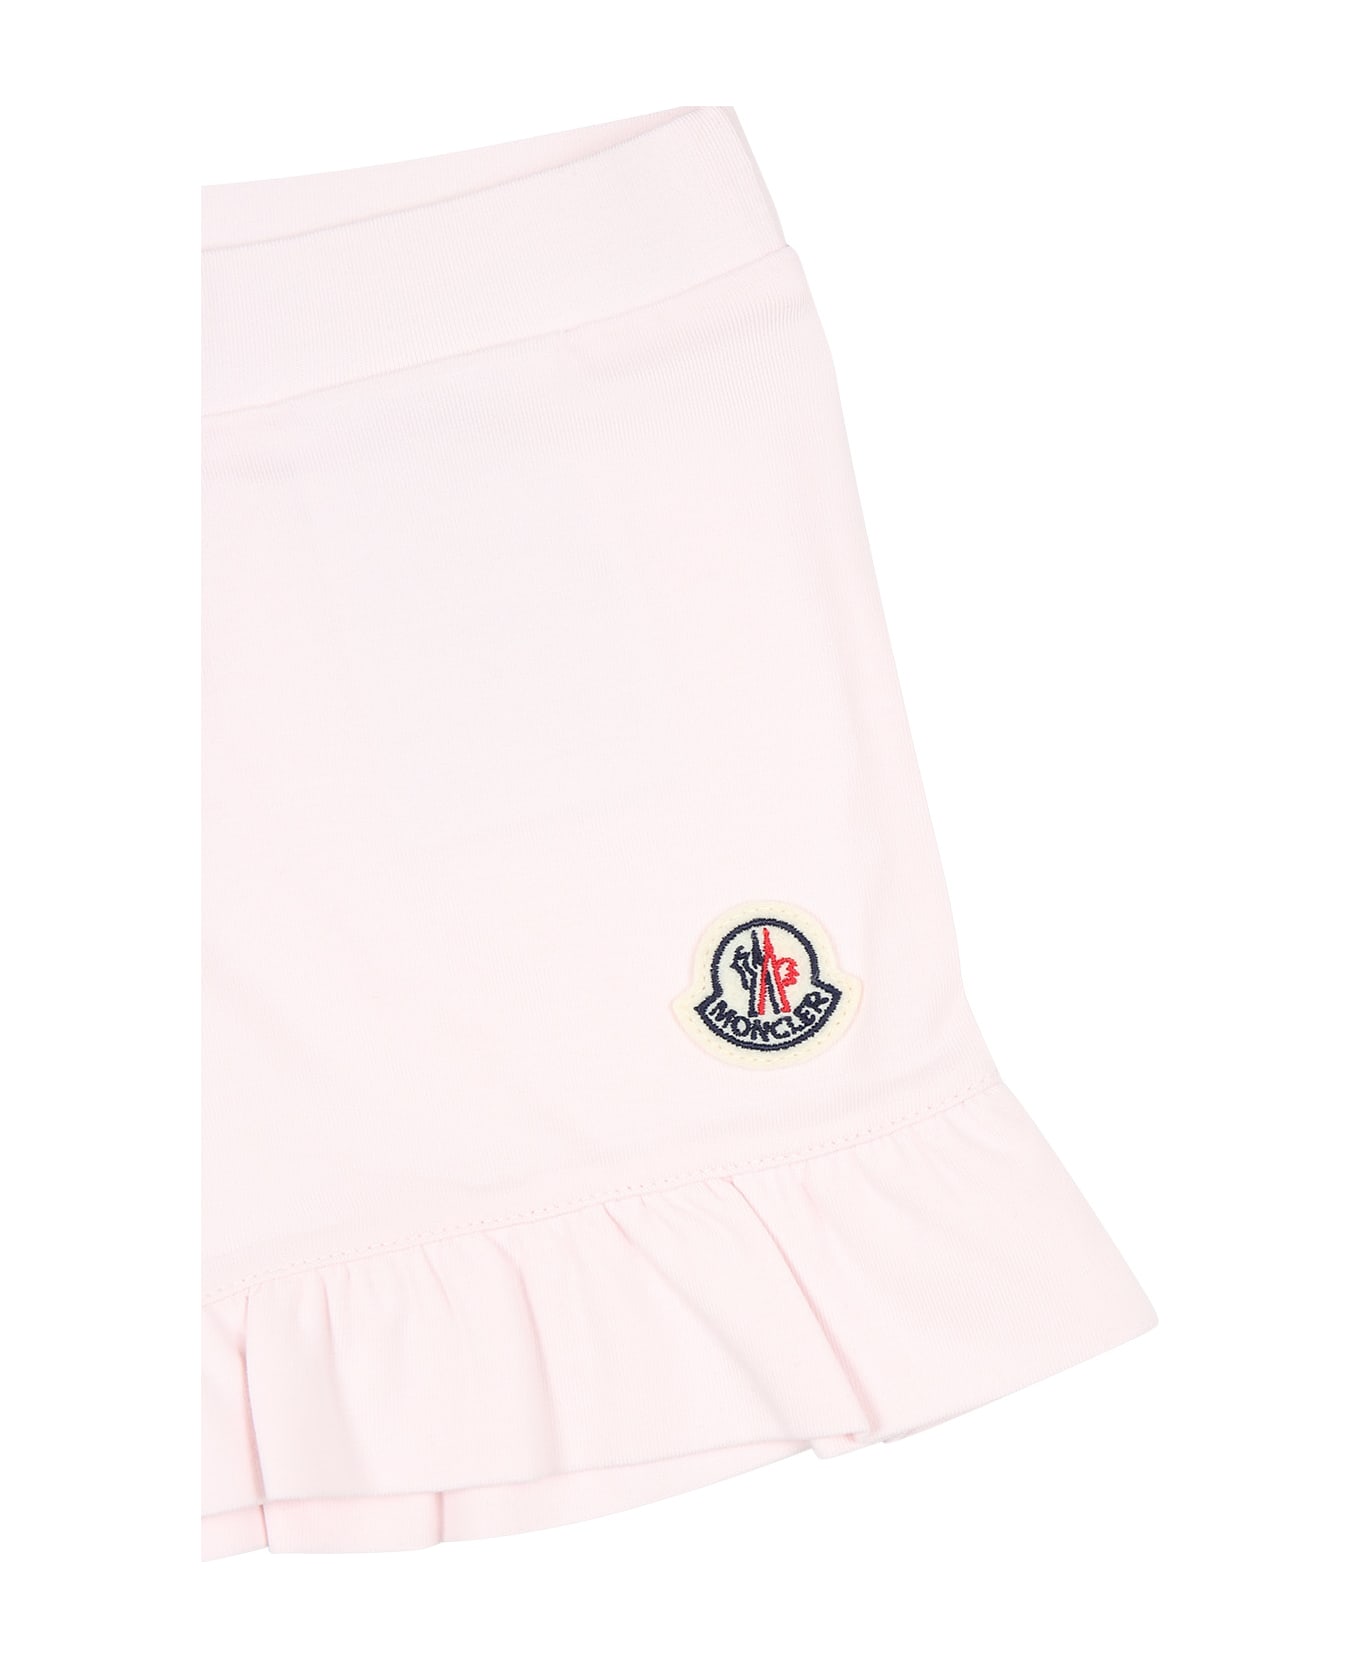 Moncler Pink Sports Suit For Baby Girl With Logo - Pink ボトムス